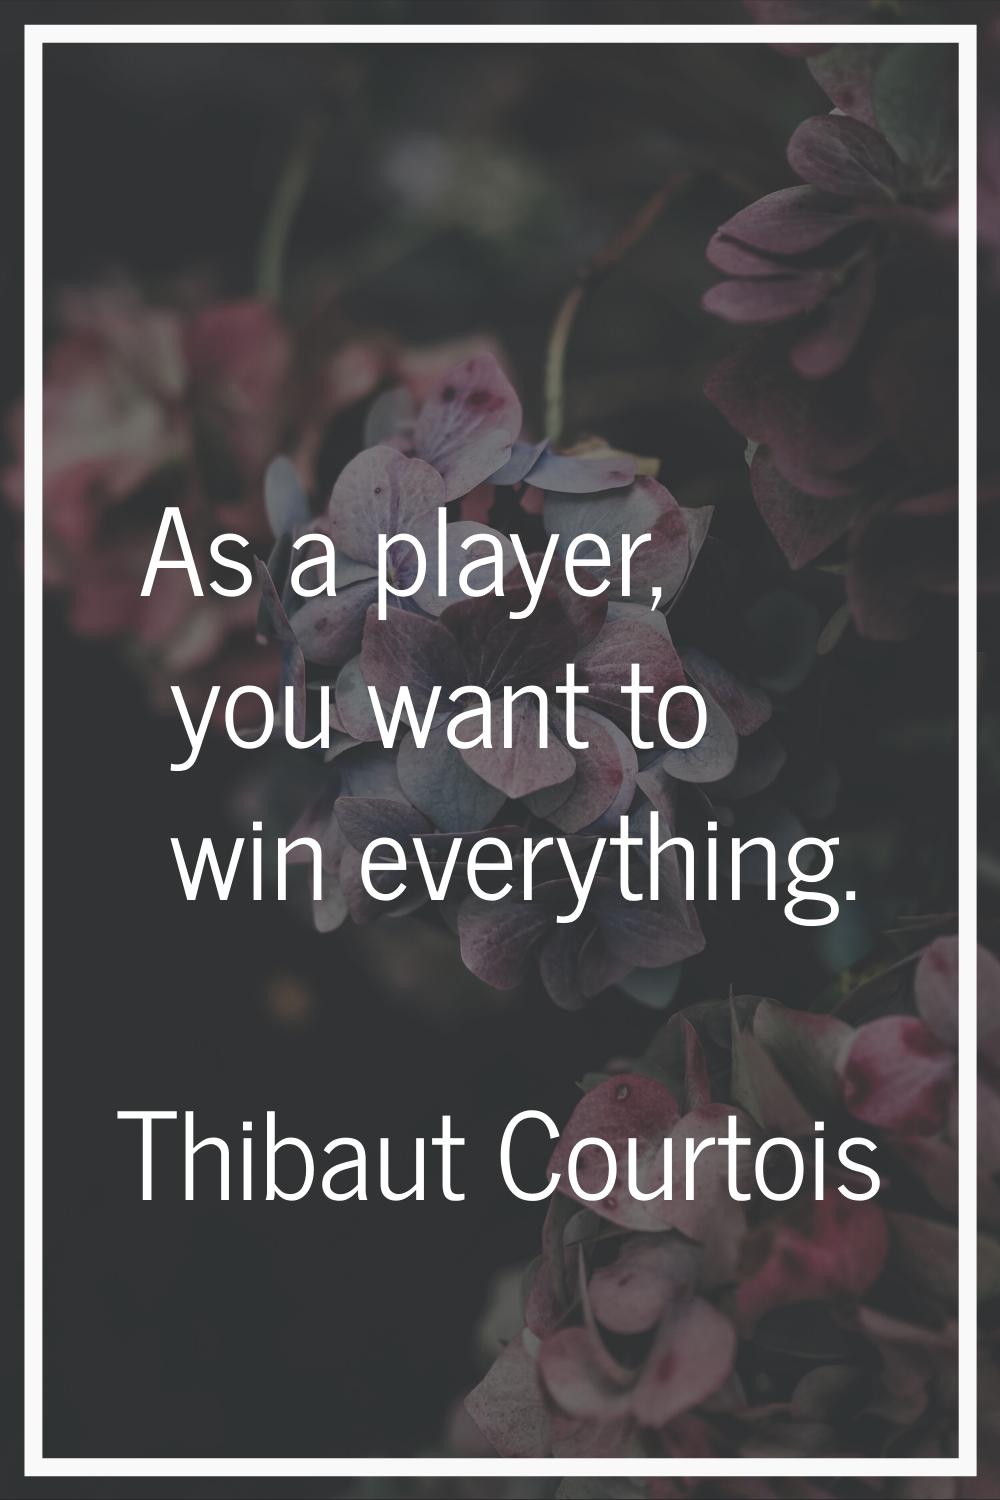 As a player, you want to win everything.